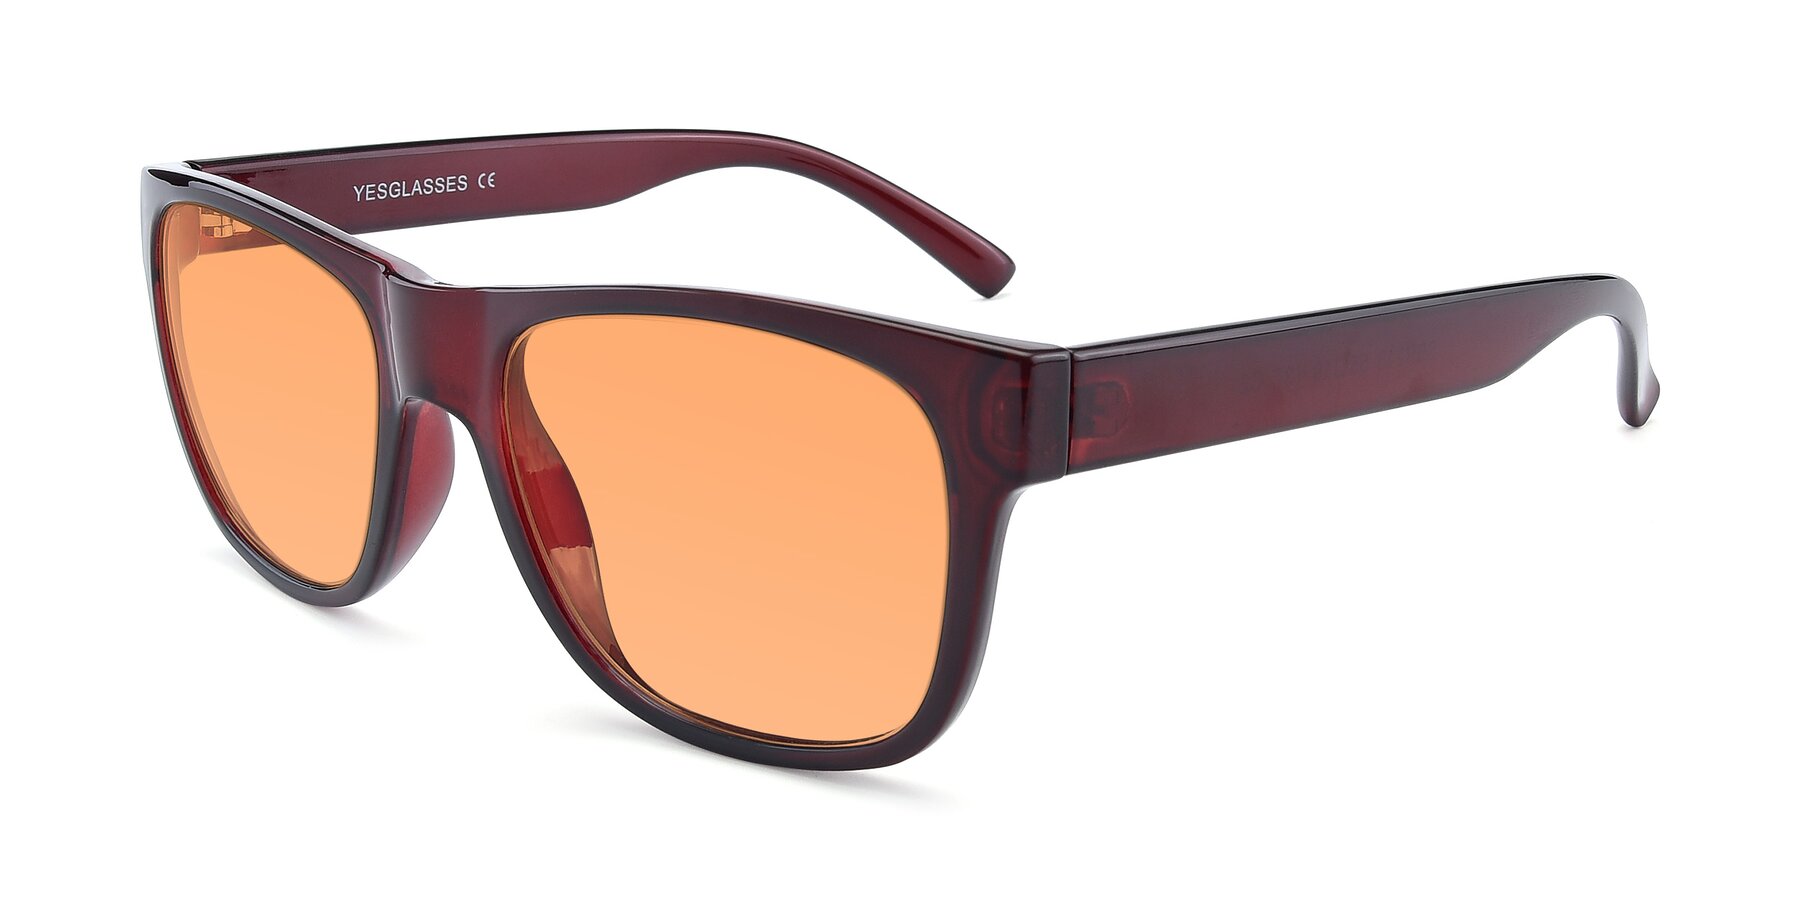 Angle of SSR213 in Wine with Medium Orange Tinted Lenses